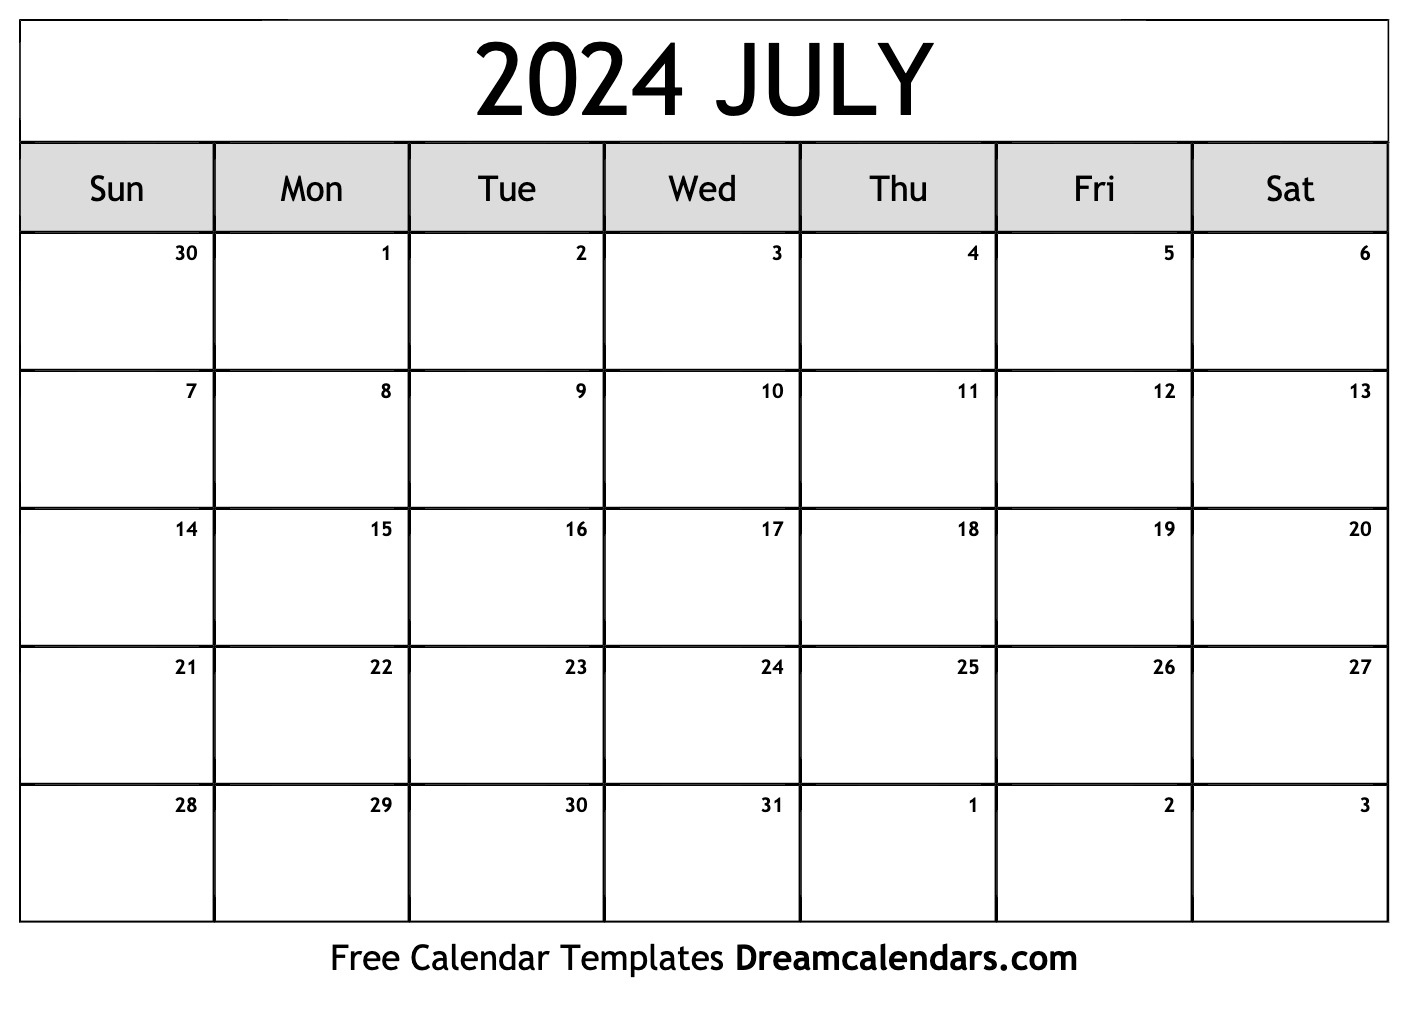 July 2024 Calendar - Free Printable With Holidays And Observances | Calendar 2024 July Template